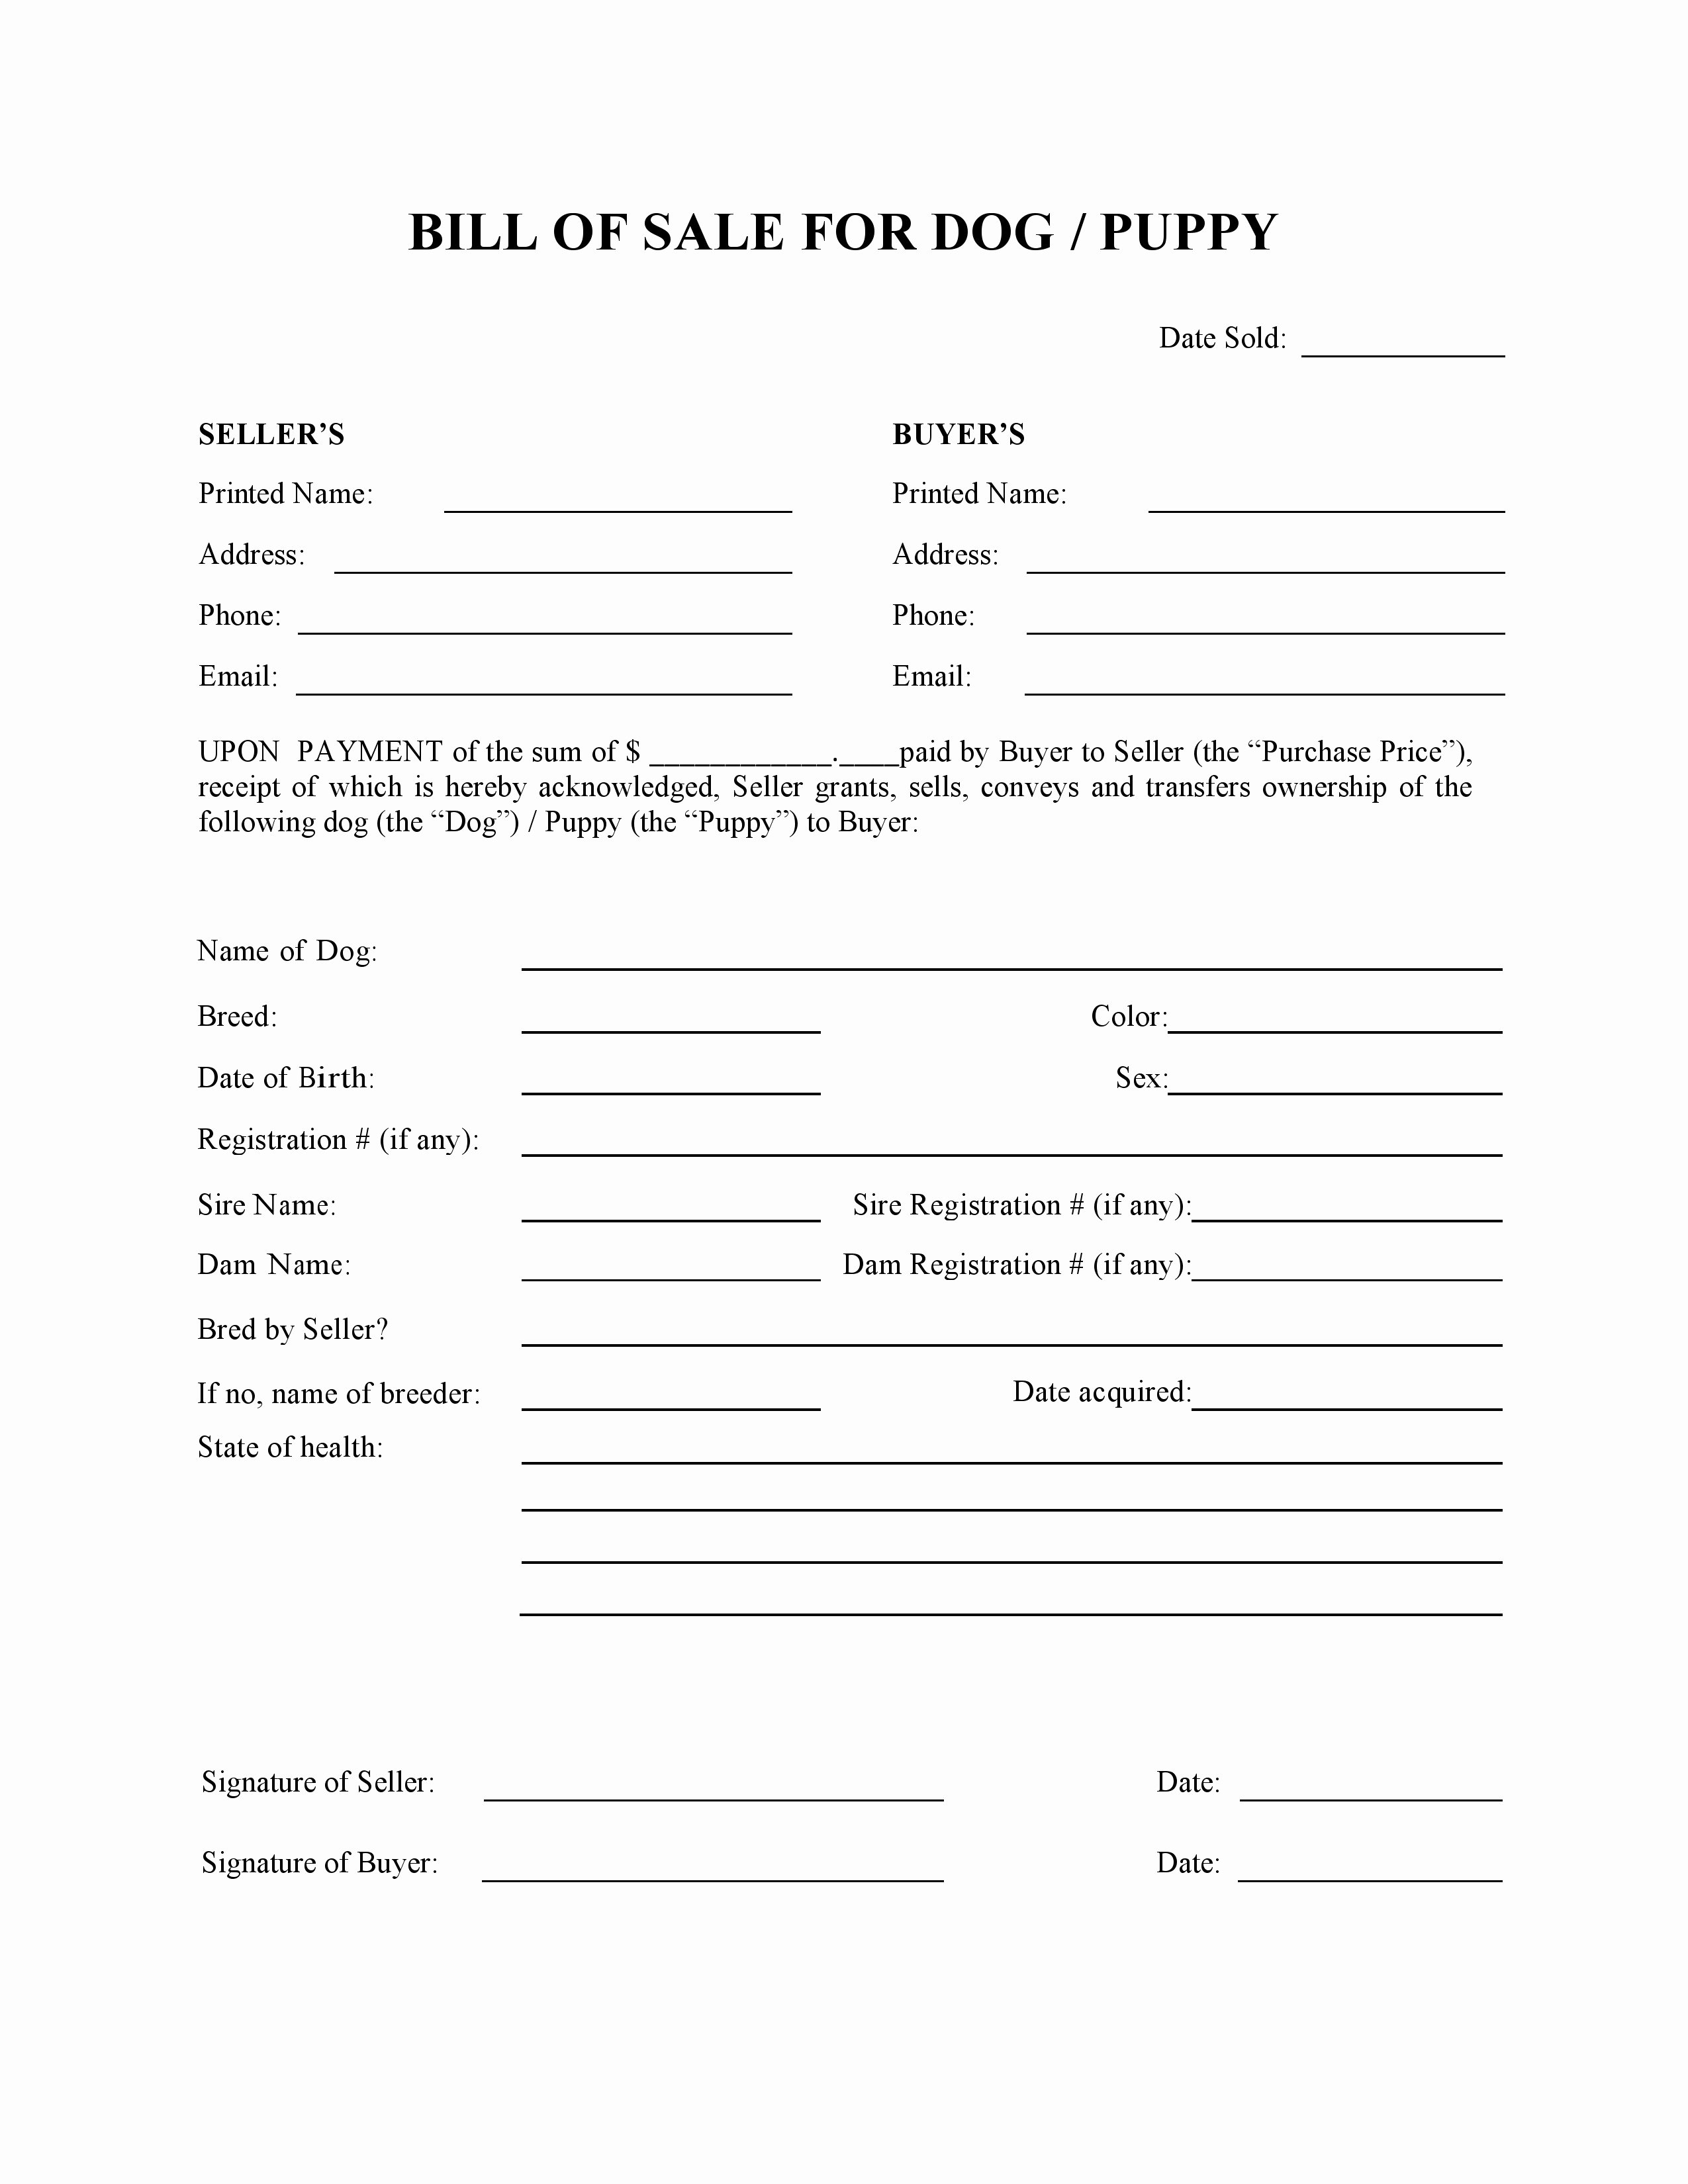 Breeding Contracts for Puppies Best Of Free Dog or Puppy Bill Of Sale form Pdf